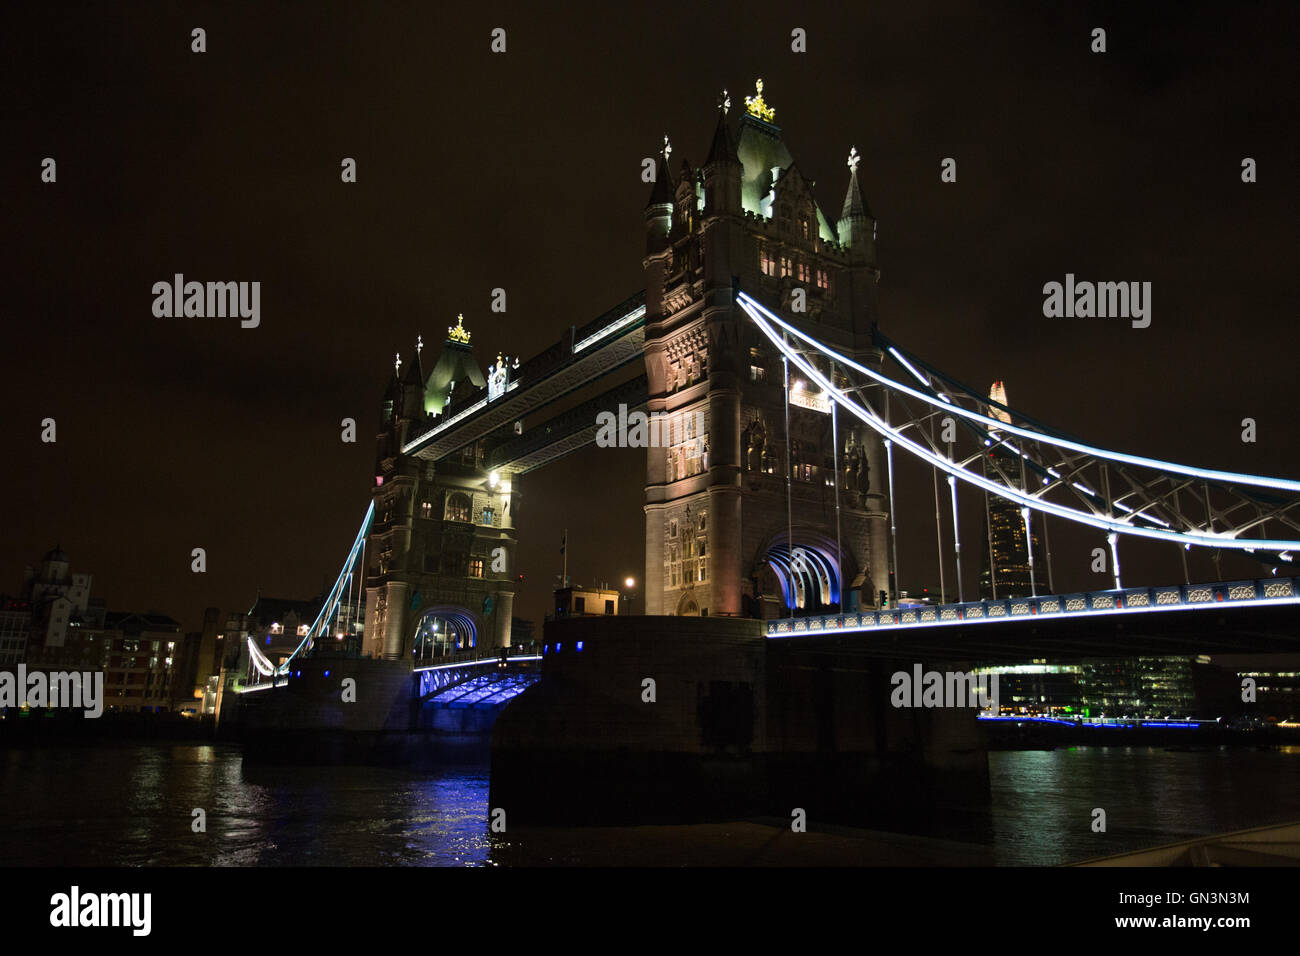 London Bridge, London, UK, Night Scene with Lights on the River Thames, taken whilst walking about London in a street photography exercise. Architect. Stock Photo